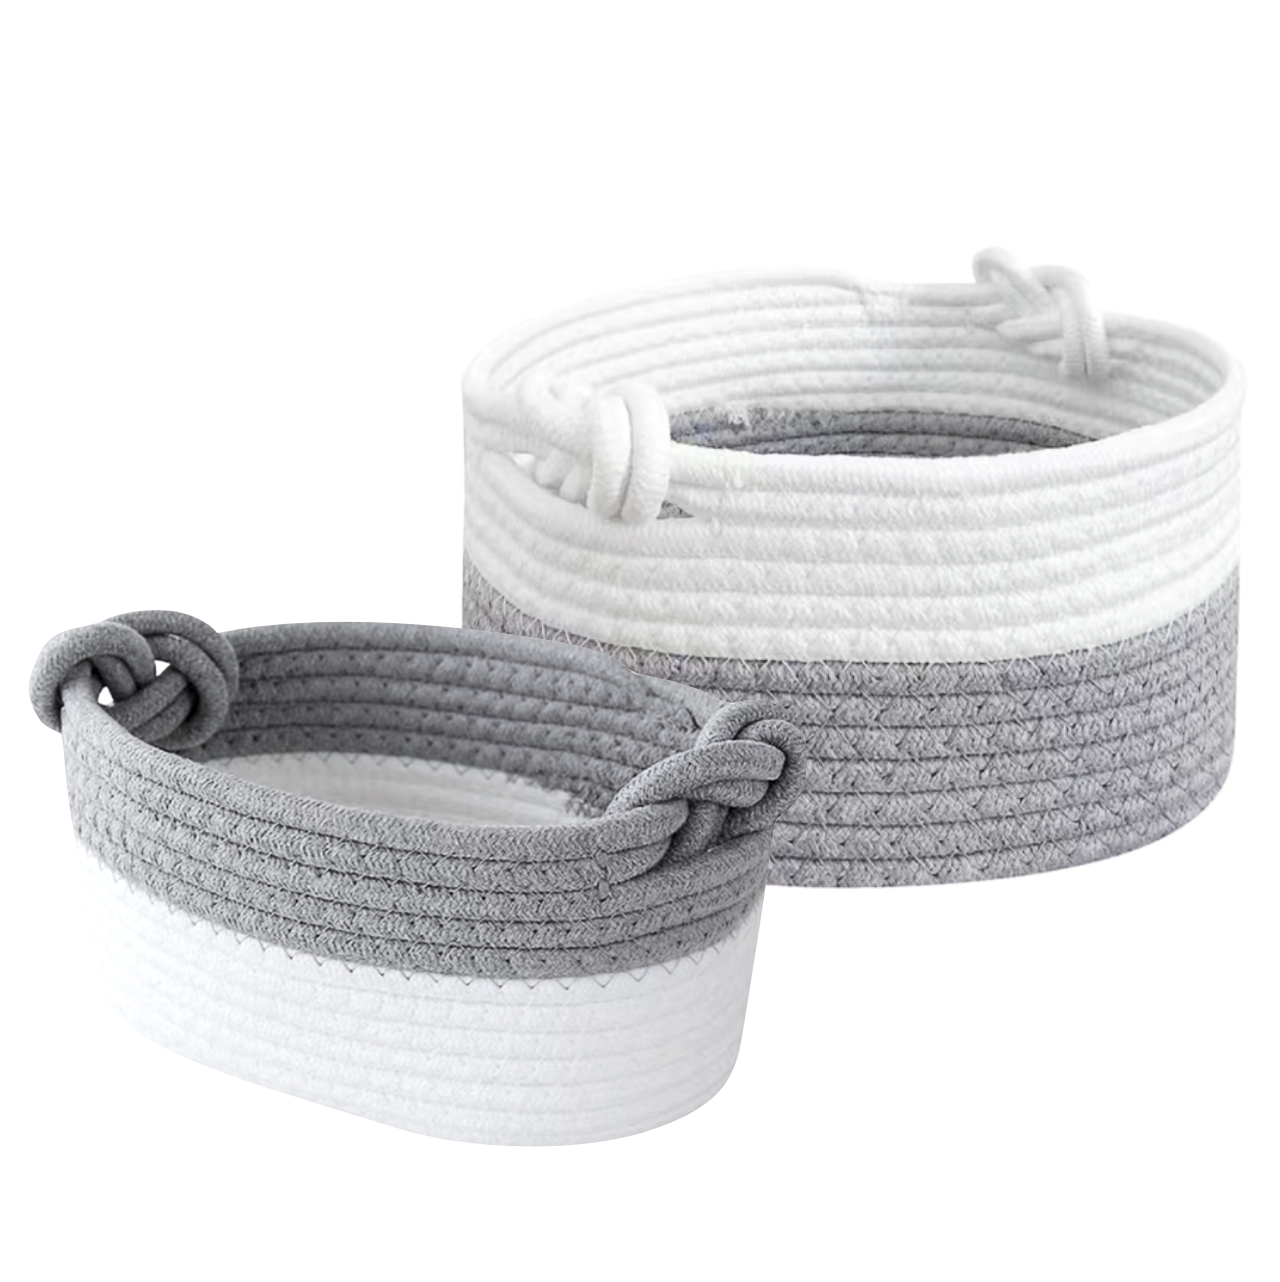 Small Braided Rope Baskets in Grey & White